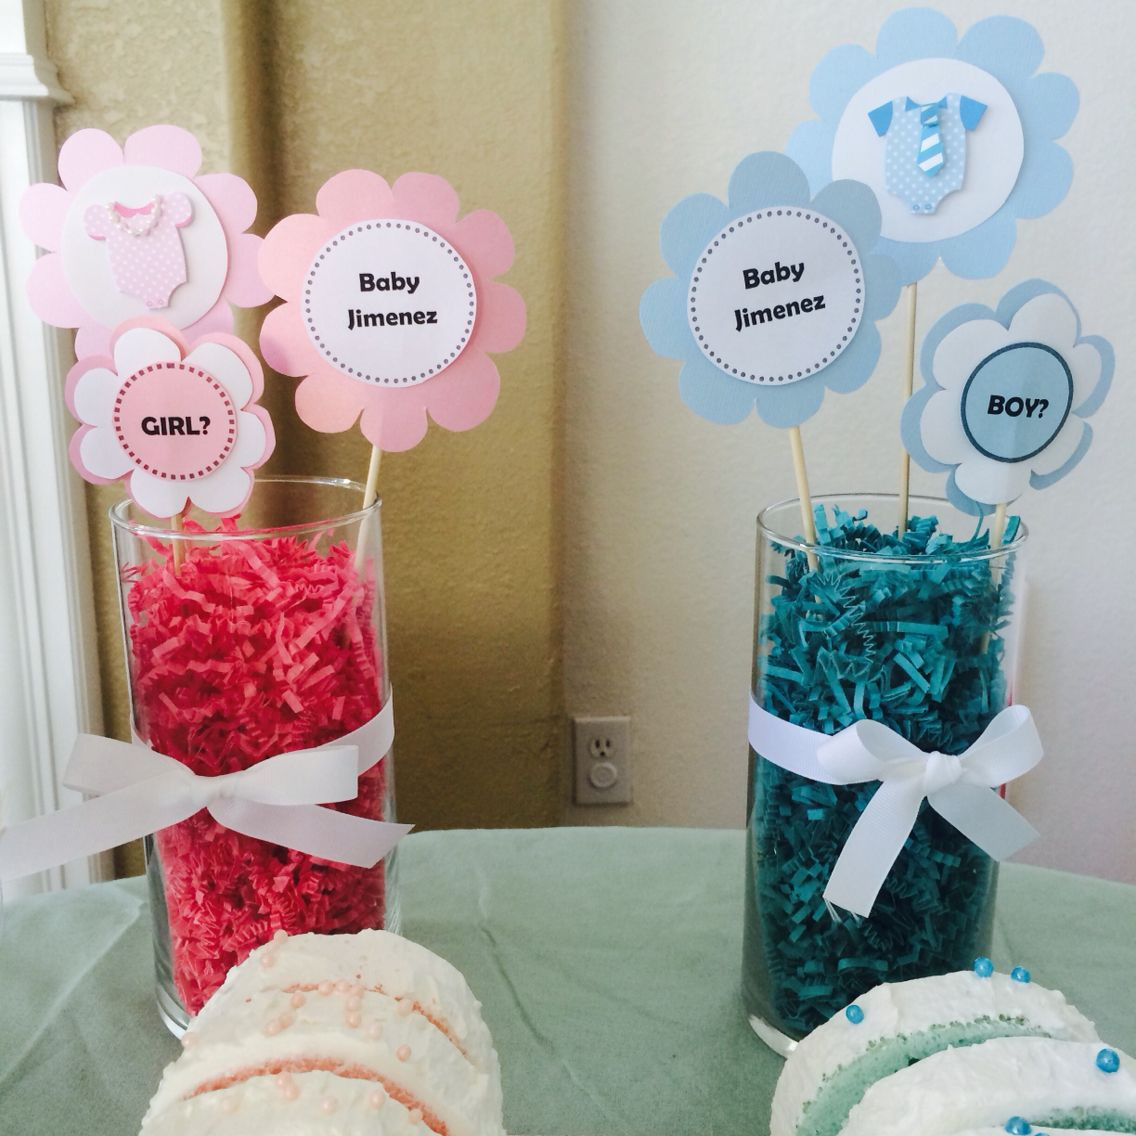 Baby Reveal Party Decoration Ideas
 DIY centerpieces for gender reveal party